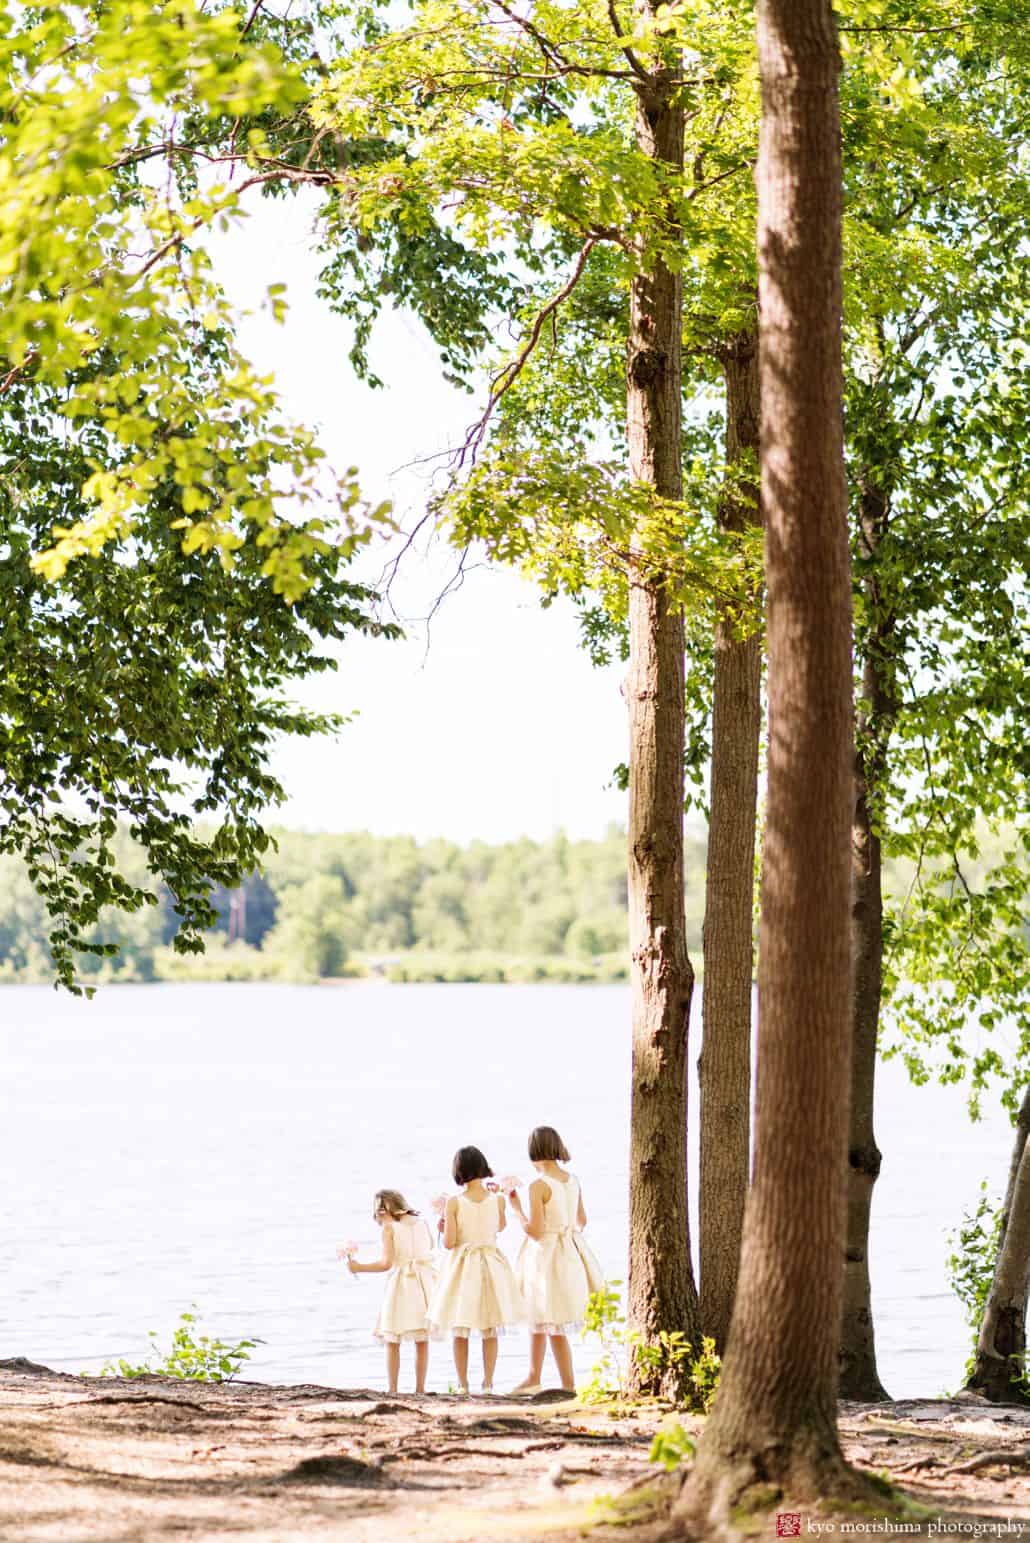 candid flower girls by the water in dresses outdoors standing next to each other looking at the water cute and candid wedding picture idea central NJ photography Late Spring Mercer County Boathouse Princeton NJ Wedding